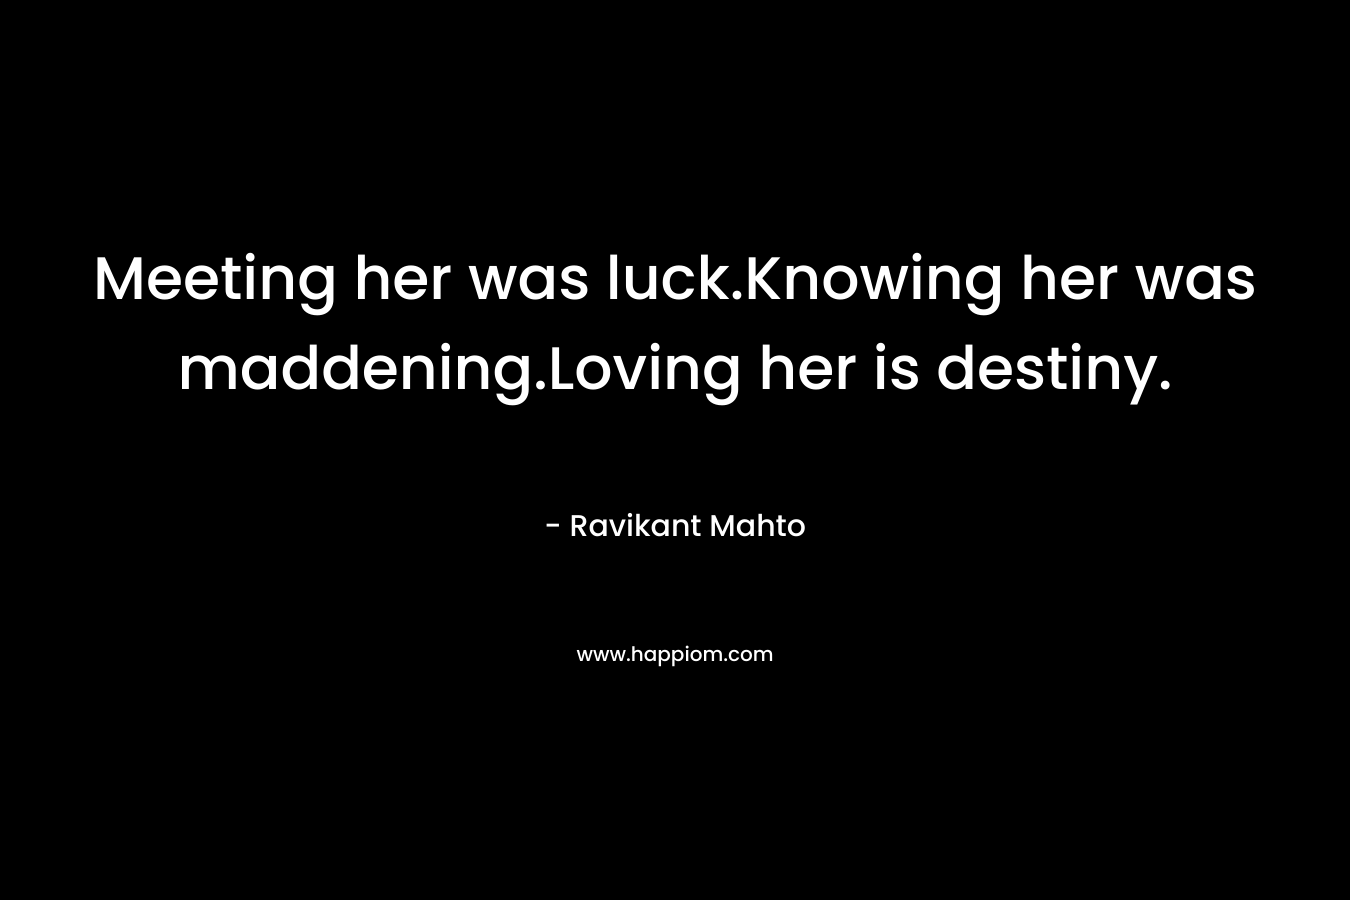 Meeting her was luck.Knowing her was maddening.Loving her is destiny.